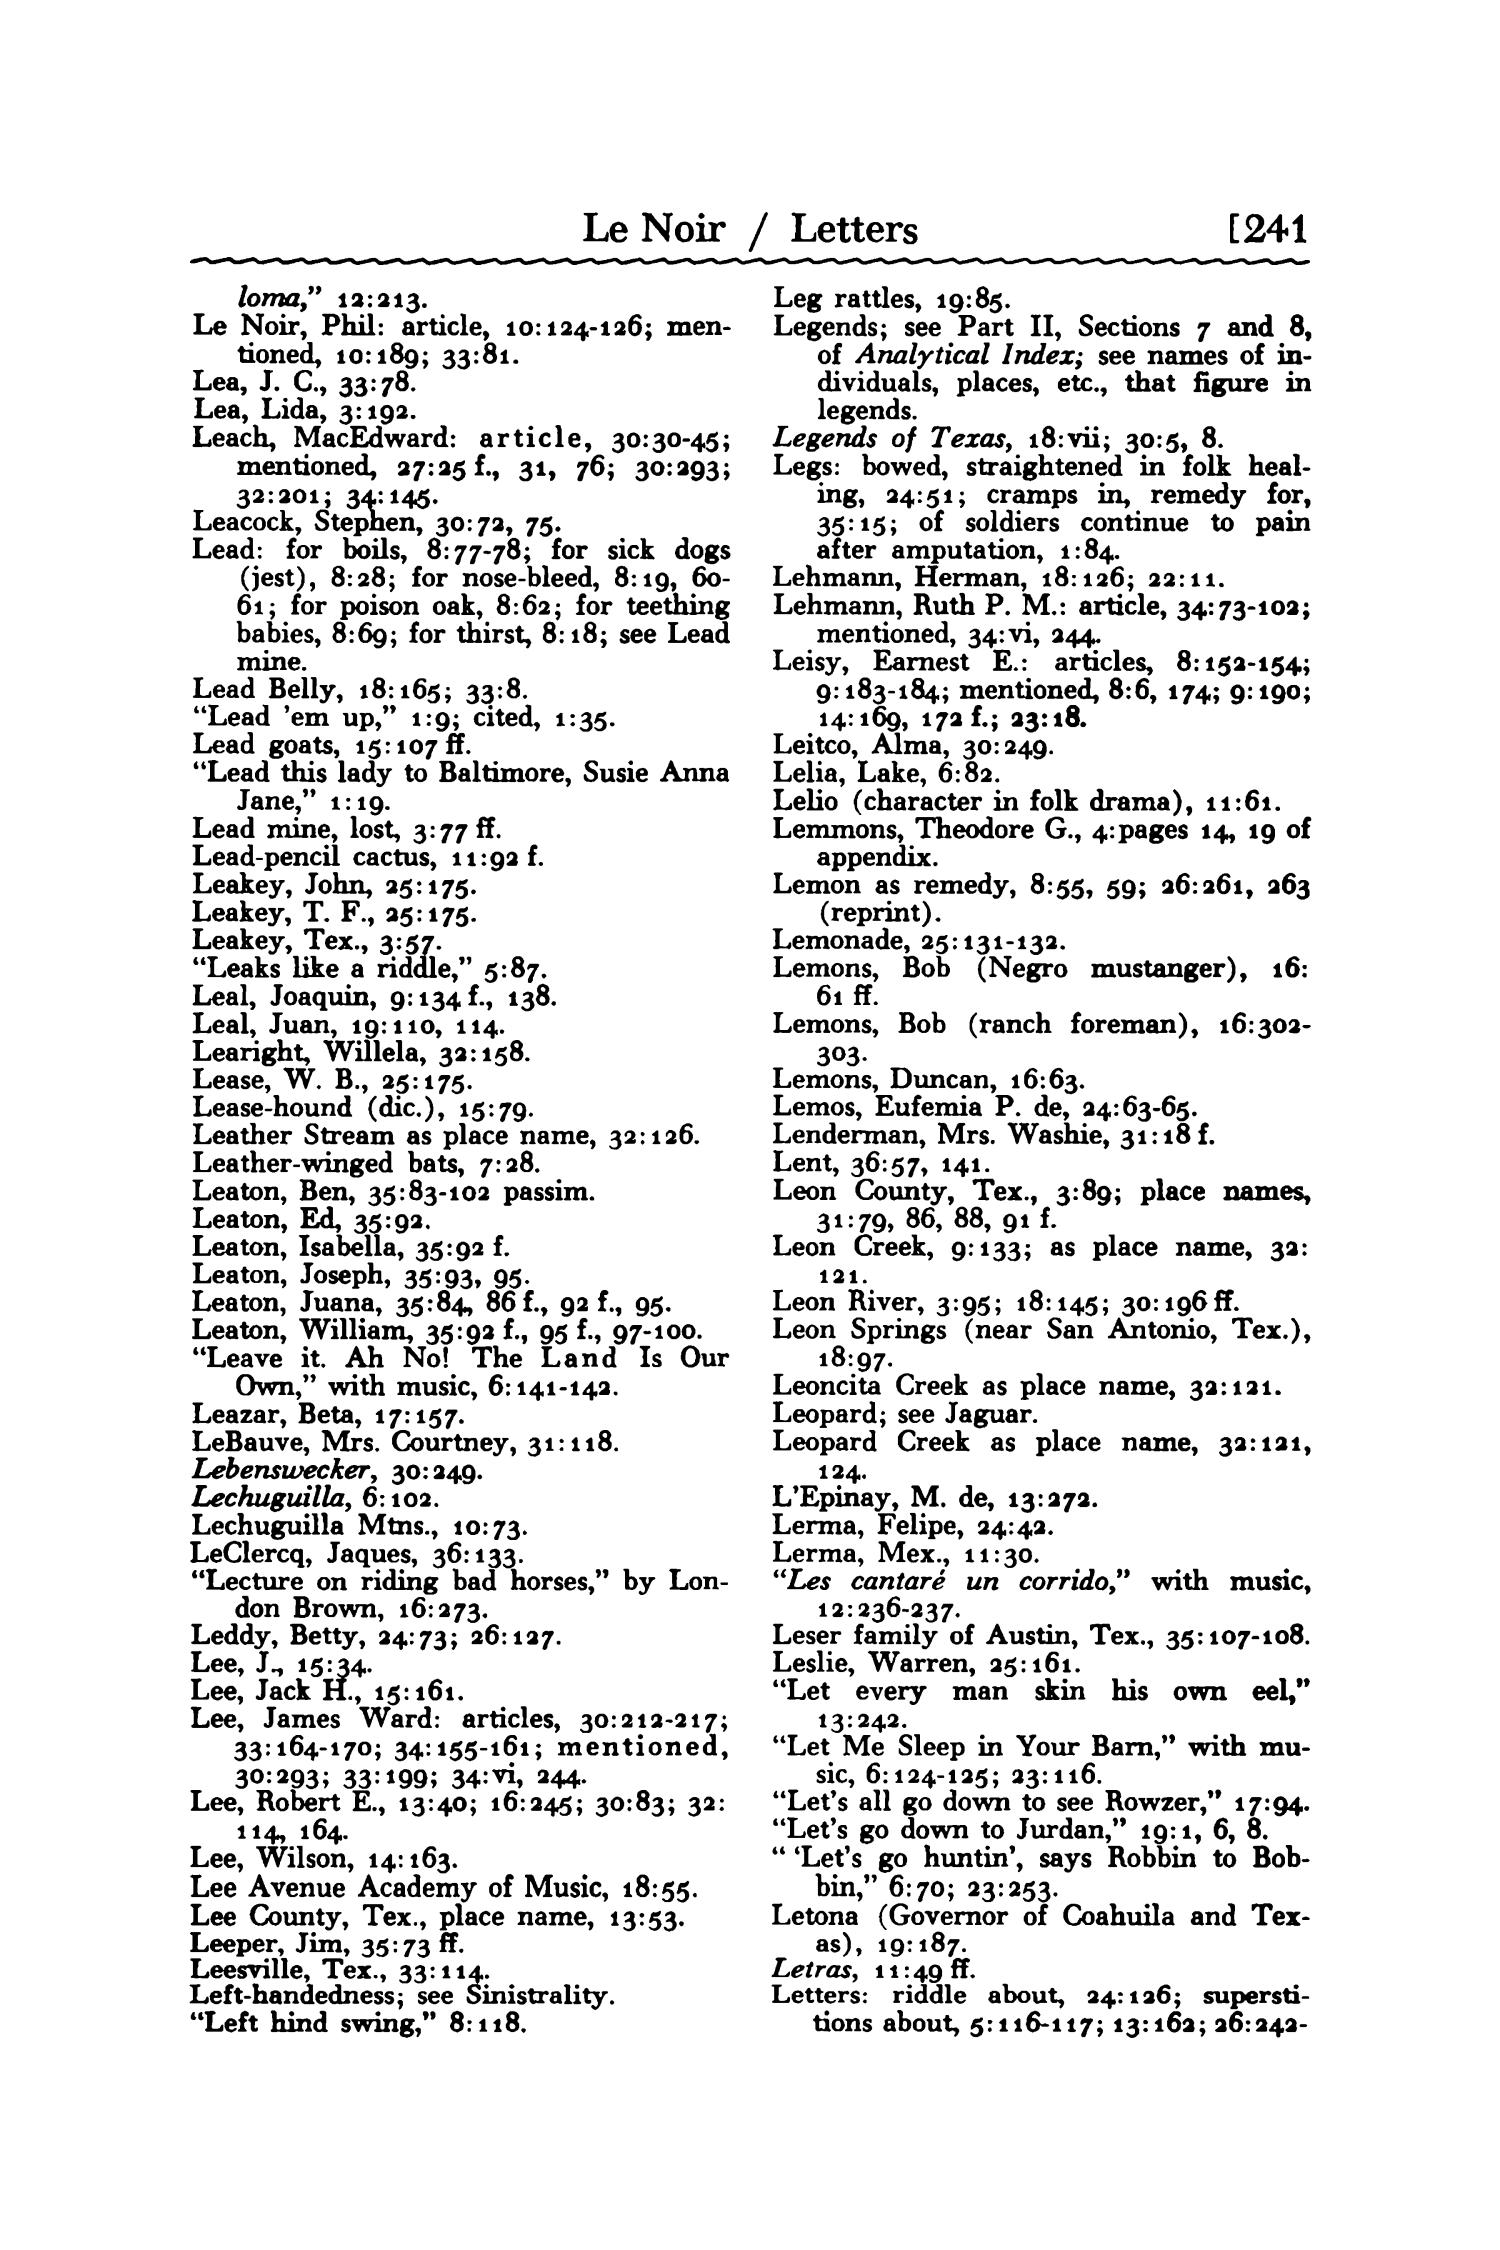 Analytical Index to Publications of the Texas Folklore Society, Volumes 1-36  - Page 210 - UNT Digital Library